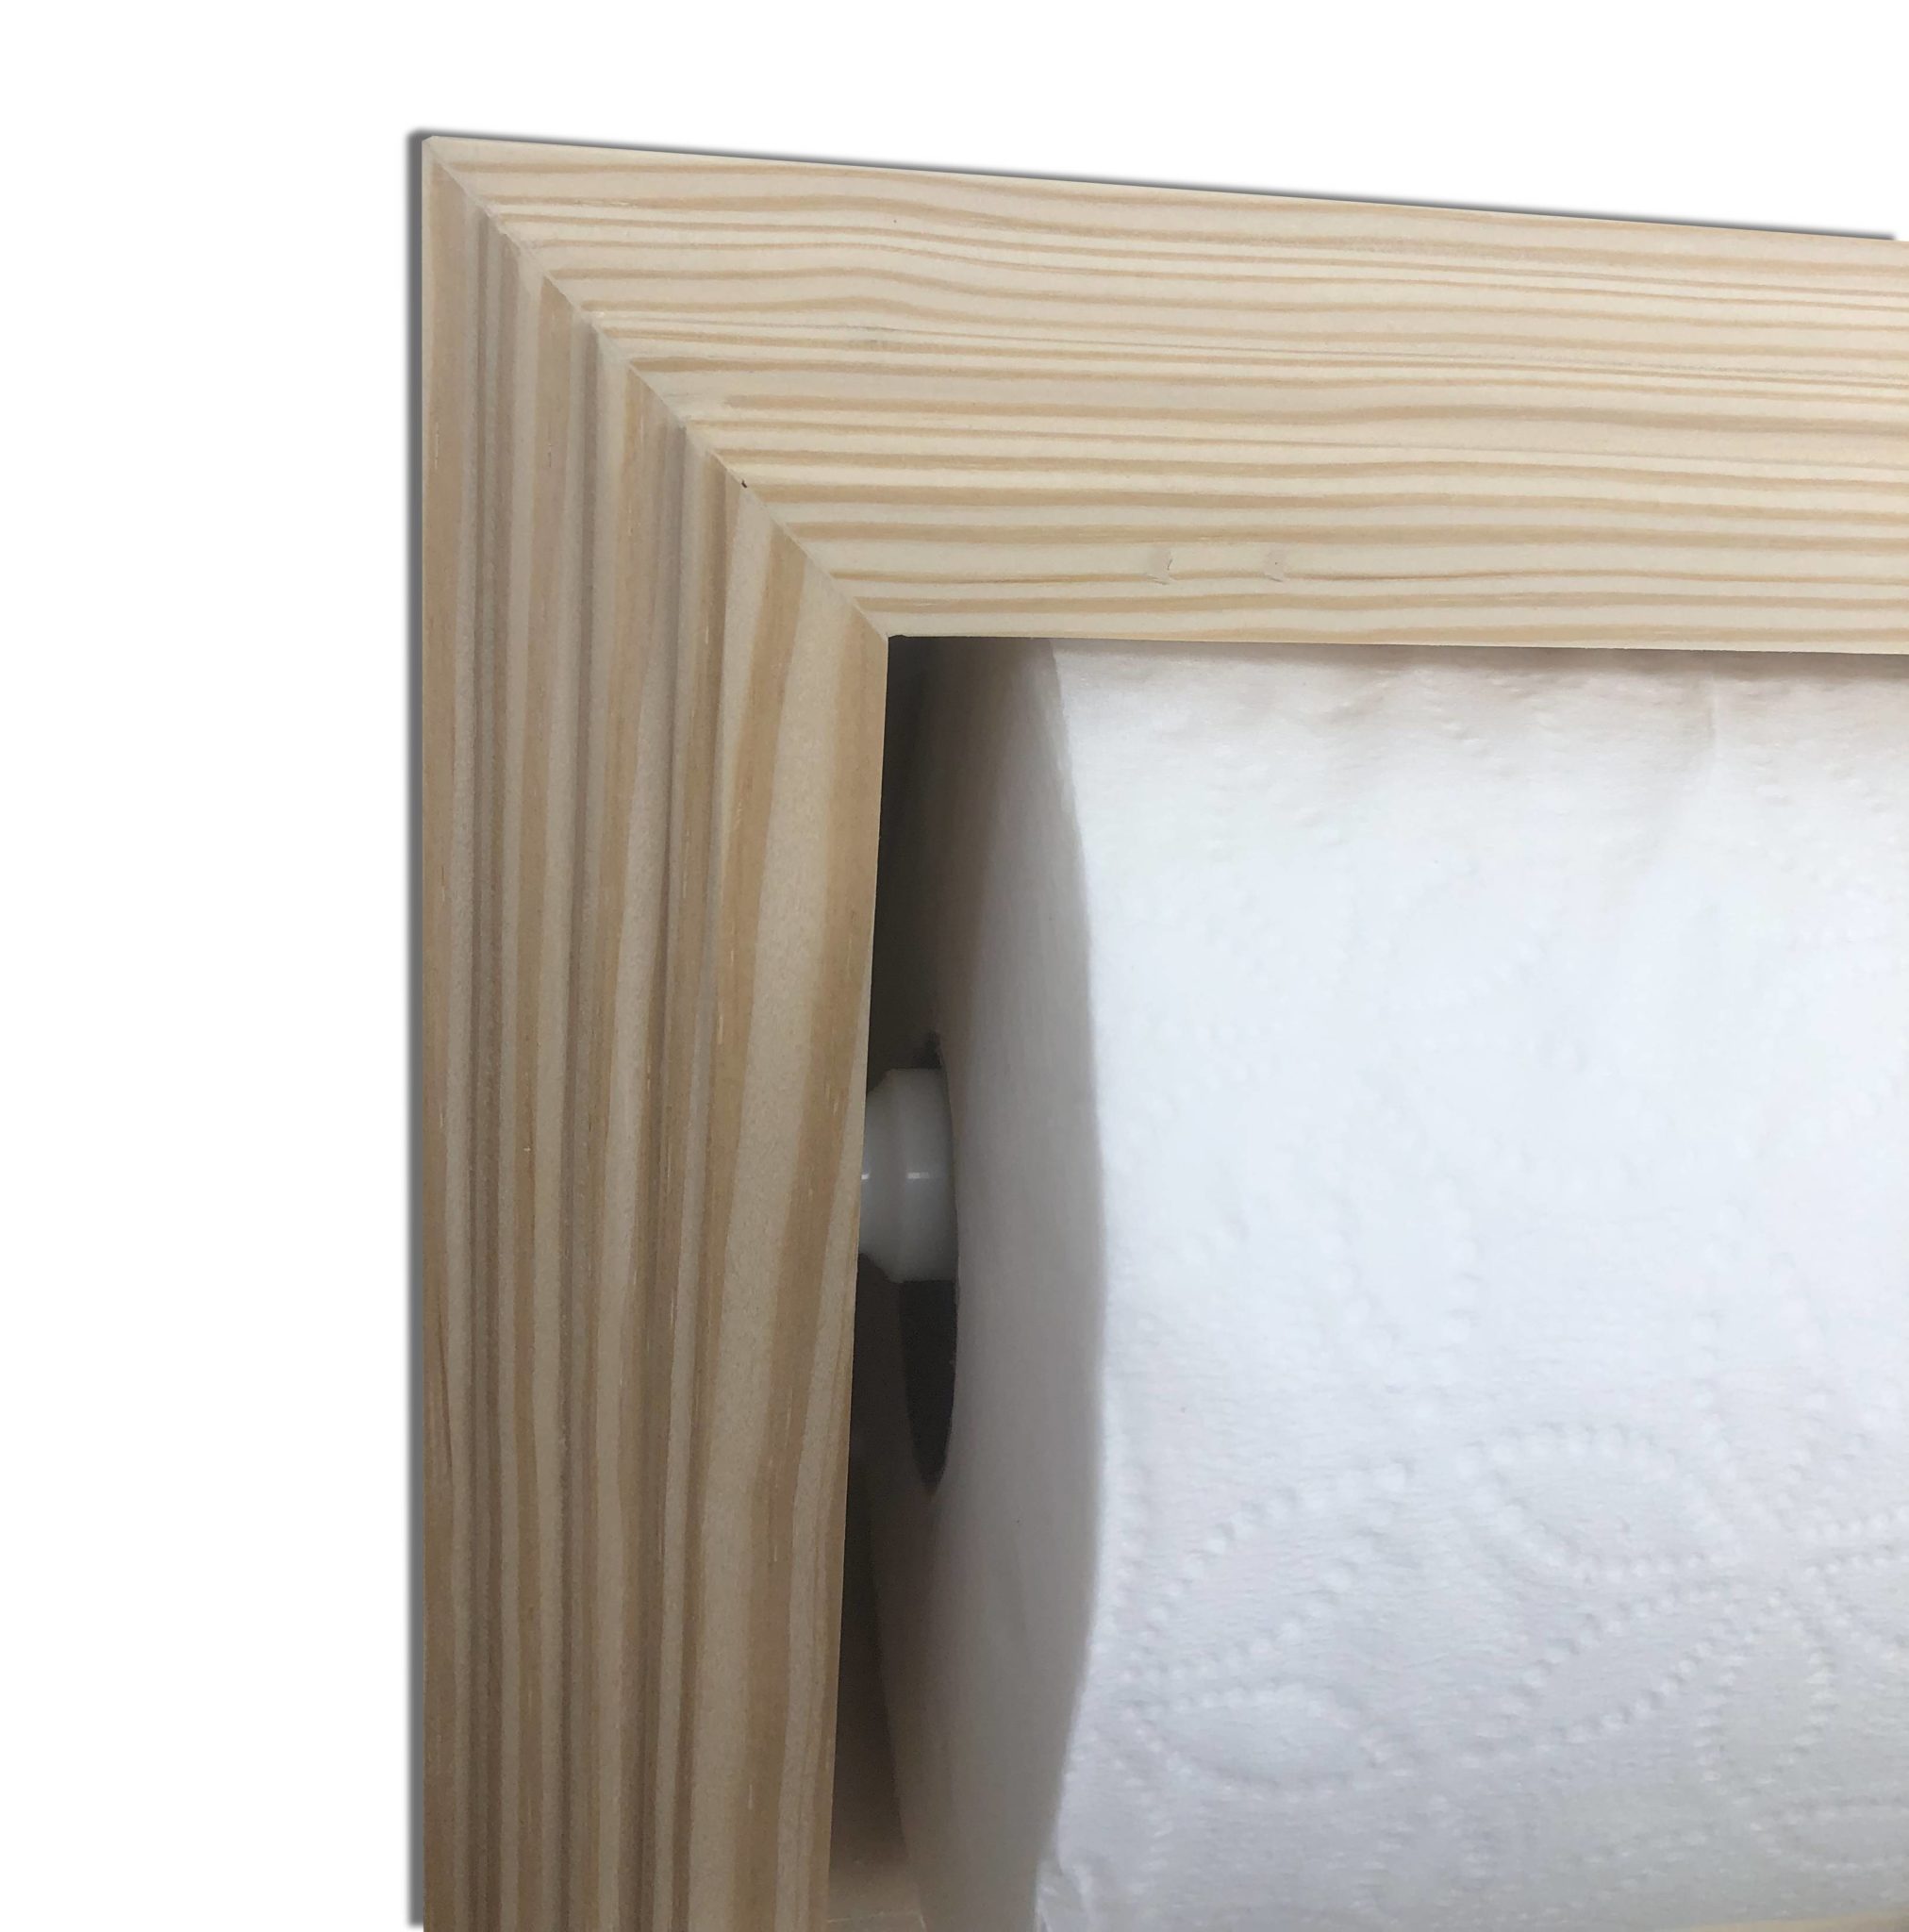 Monterey-17 Combination Toilet Paper Holder Recessed Magazine Rack - WG  Wood Products